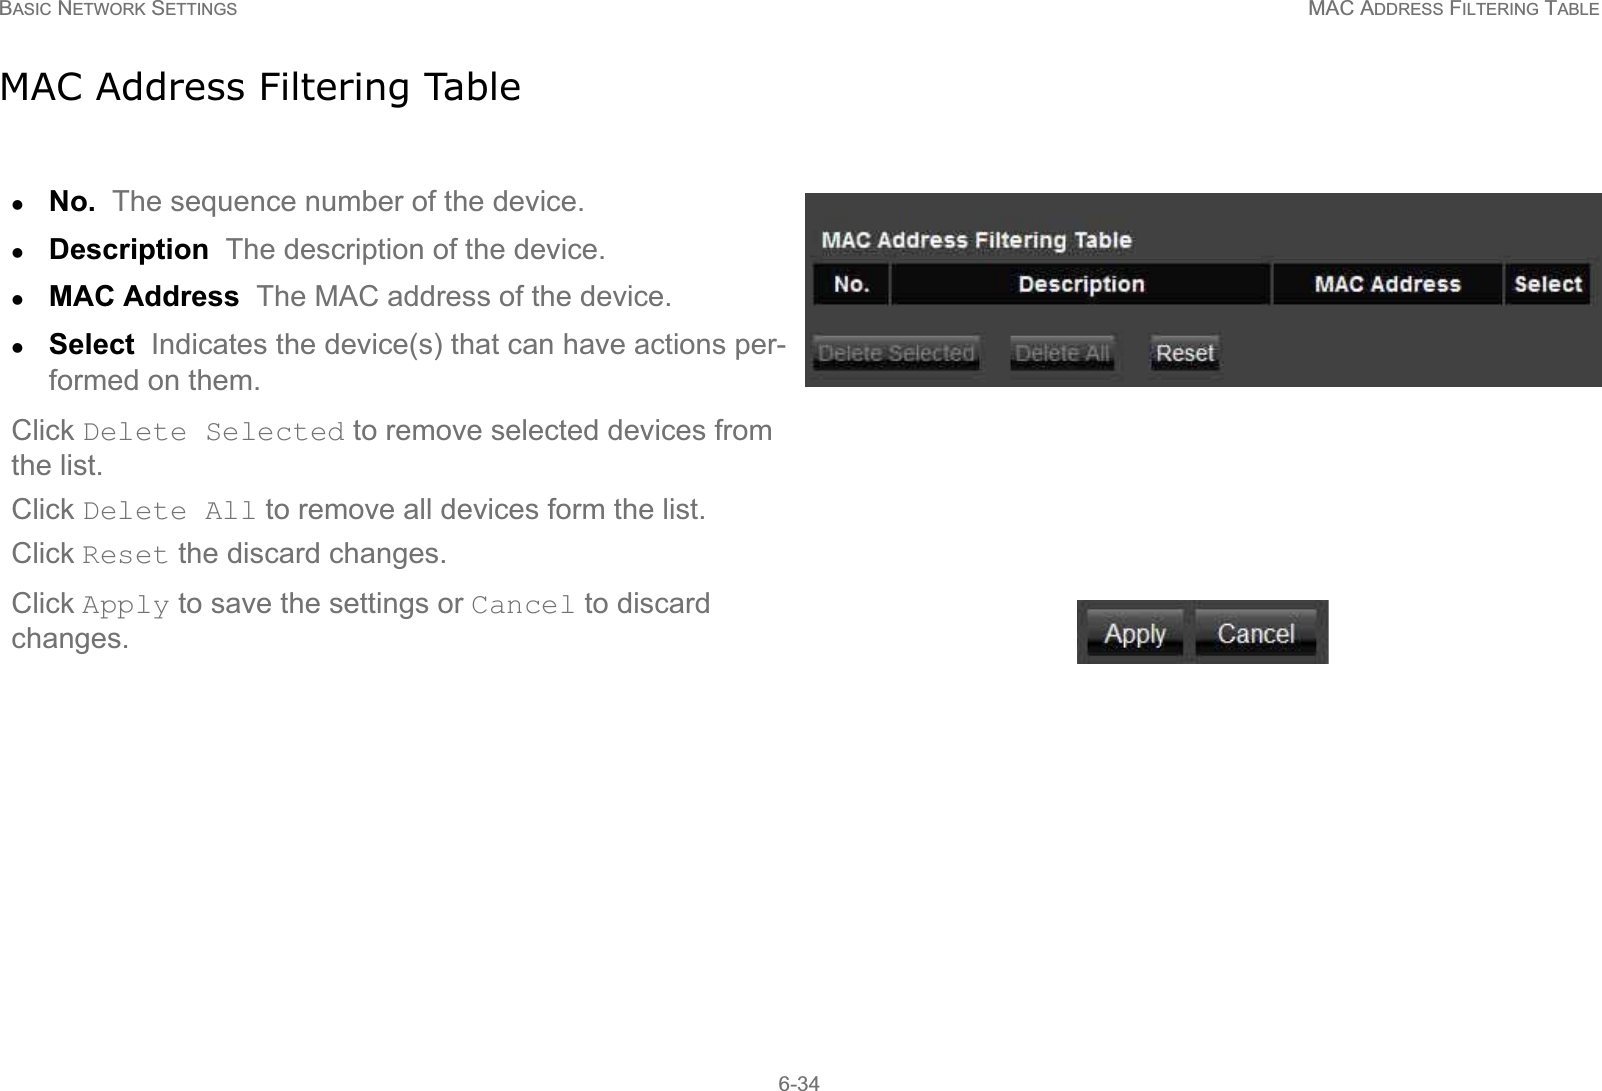 BASIC NETWORK SETTINGS MAC ADDRESS FILTERING TABLE6-34MAC Address Filtering TablezNo.  The sequence number of the device.zDescription  The description of the device.zMAC Address  The MAC address of the device.zSelect  Indicates the device(s) that can have actions per-formed on them.Click Delete Selected to remove selected devices from the list.Click Delete All to remove all devices form the list.Click Reset the discard changes.Click Apply to save the settings or Cancel to discard changes.